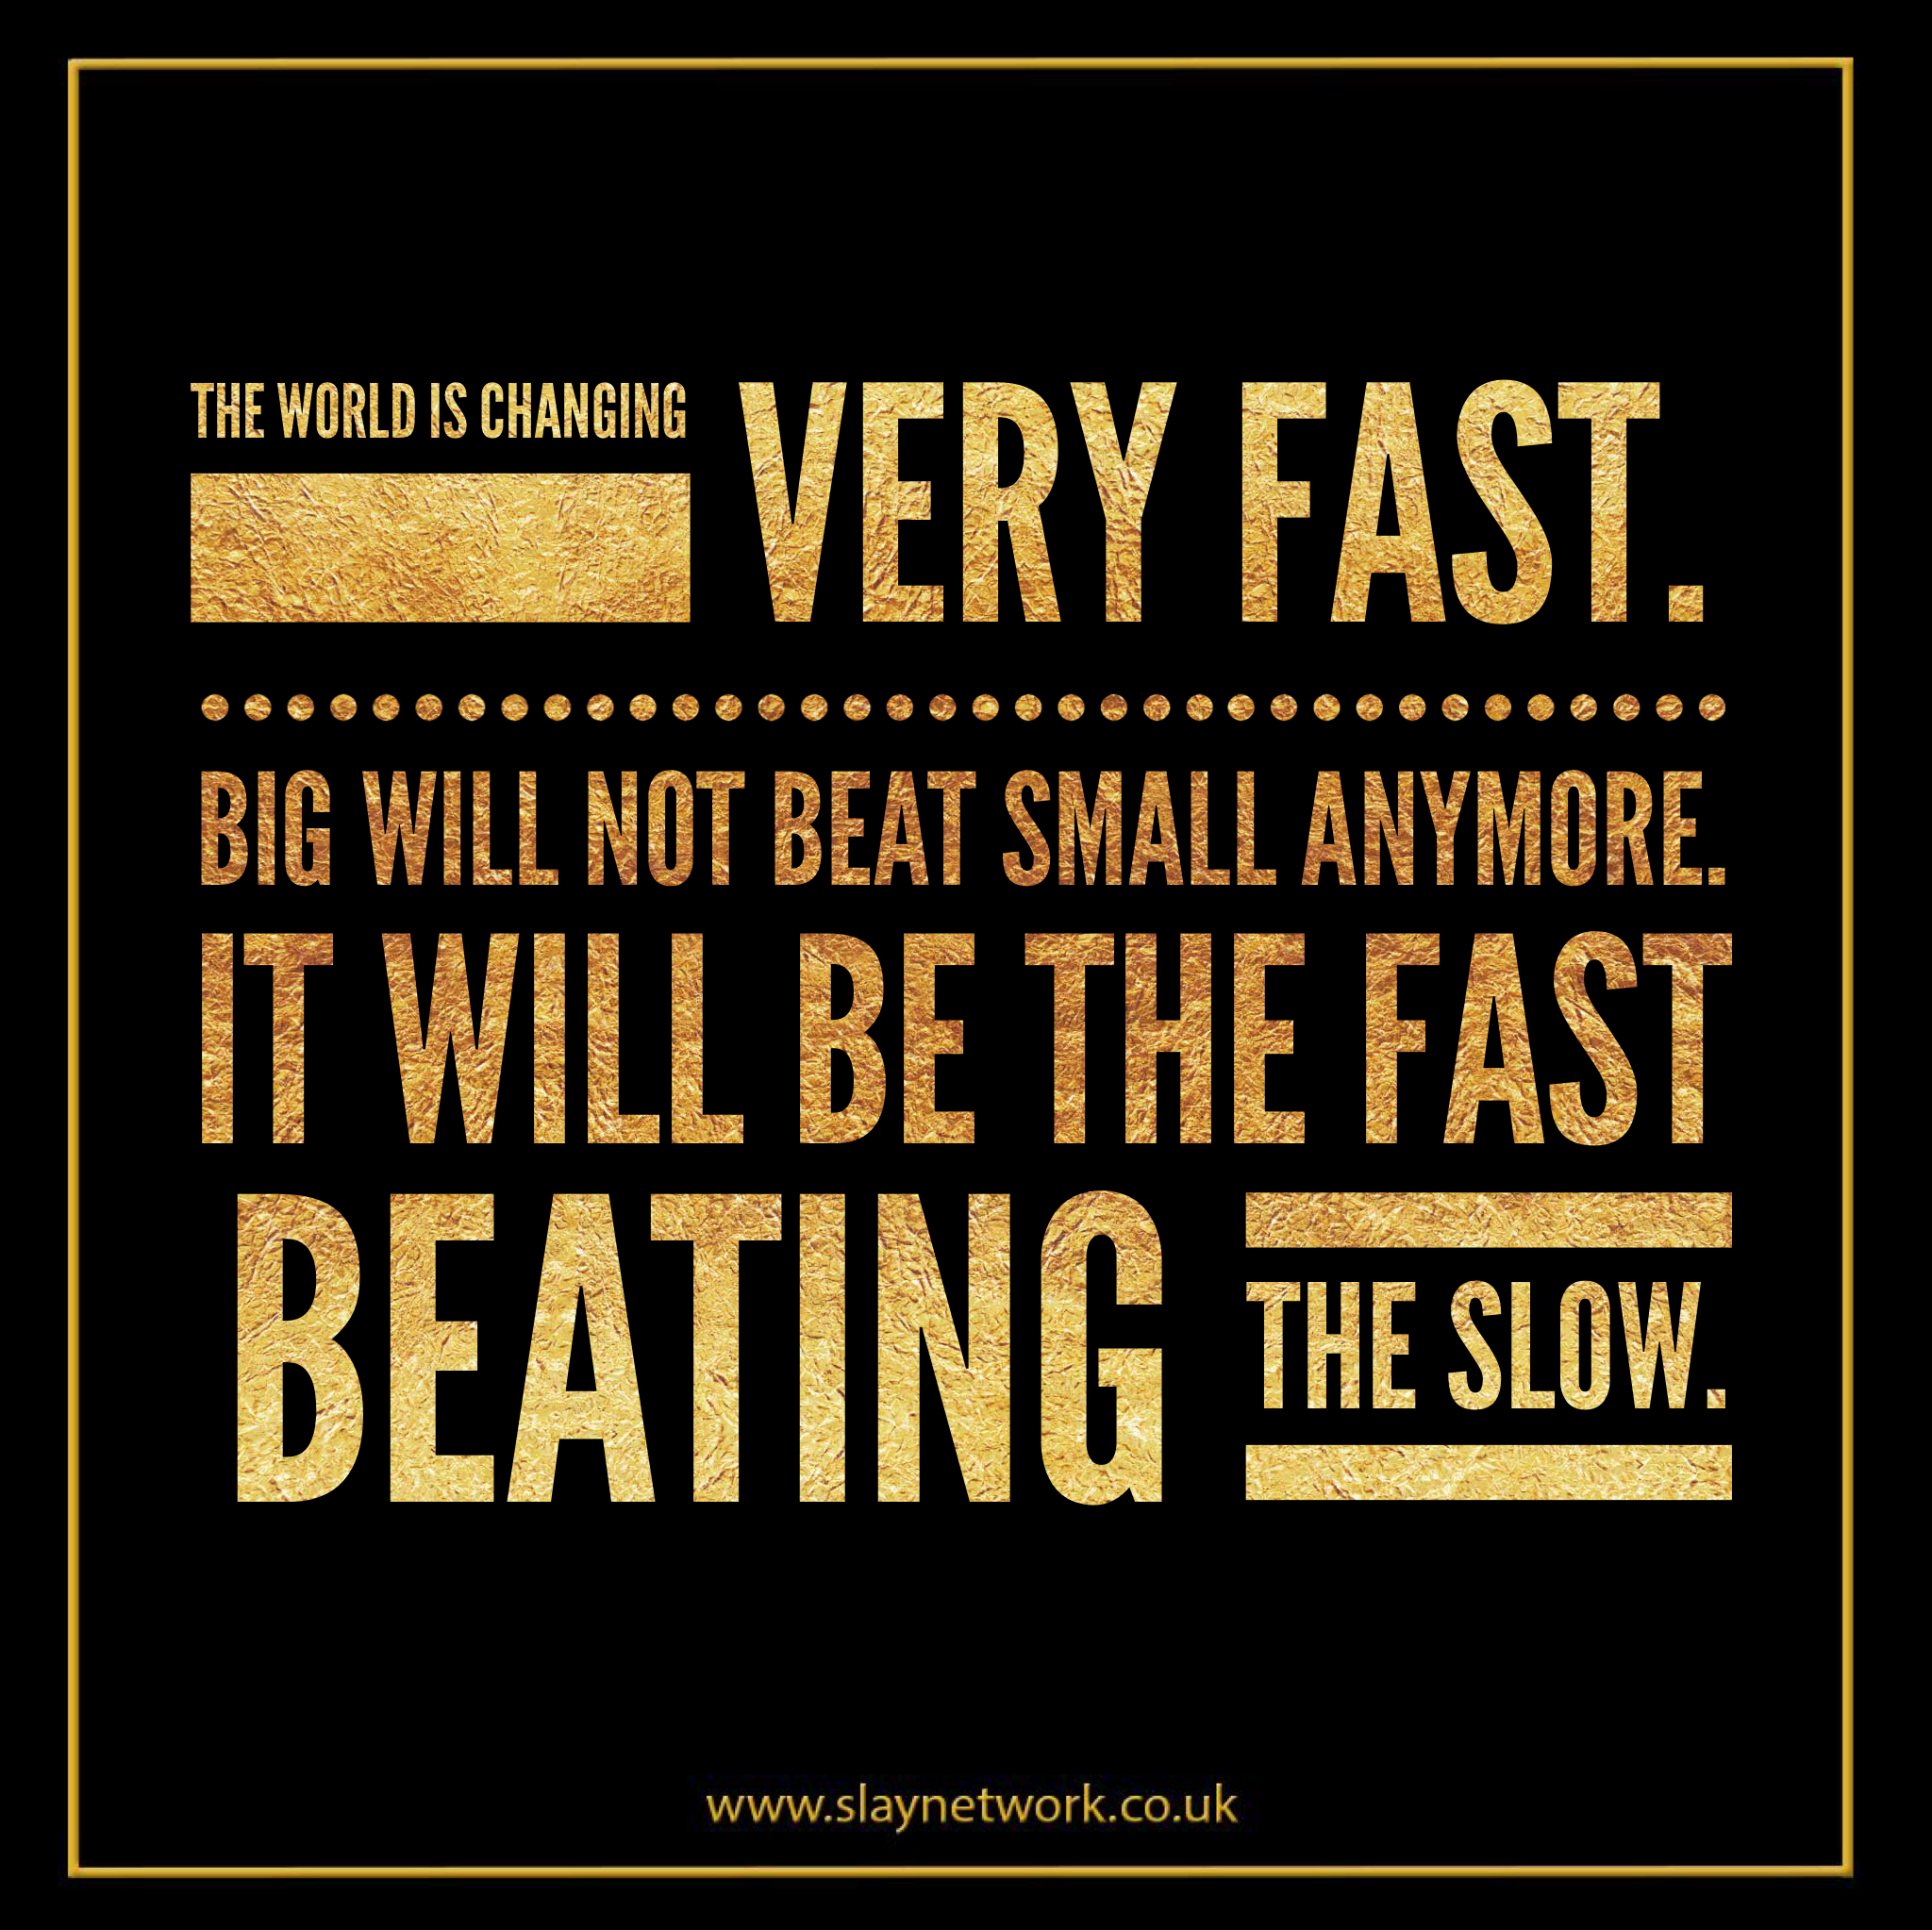 No longer will big beat small, only the fast will win!